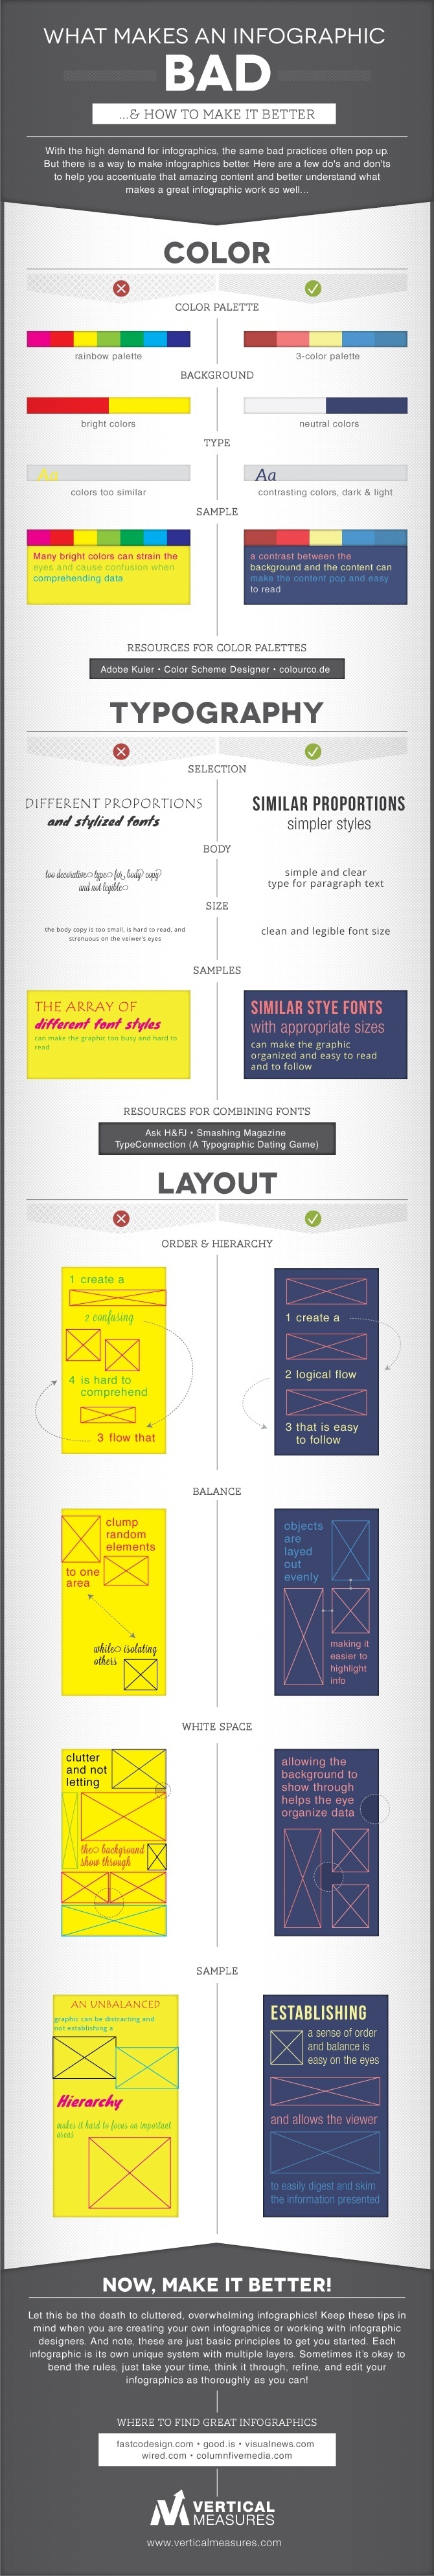 What Makes An #Infographic Bad And How To Make It Better